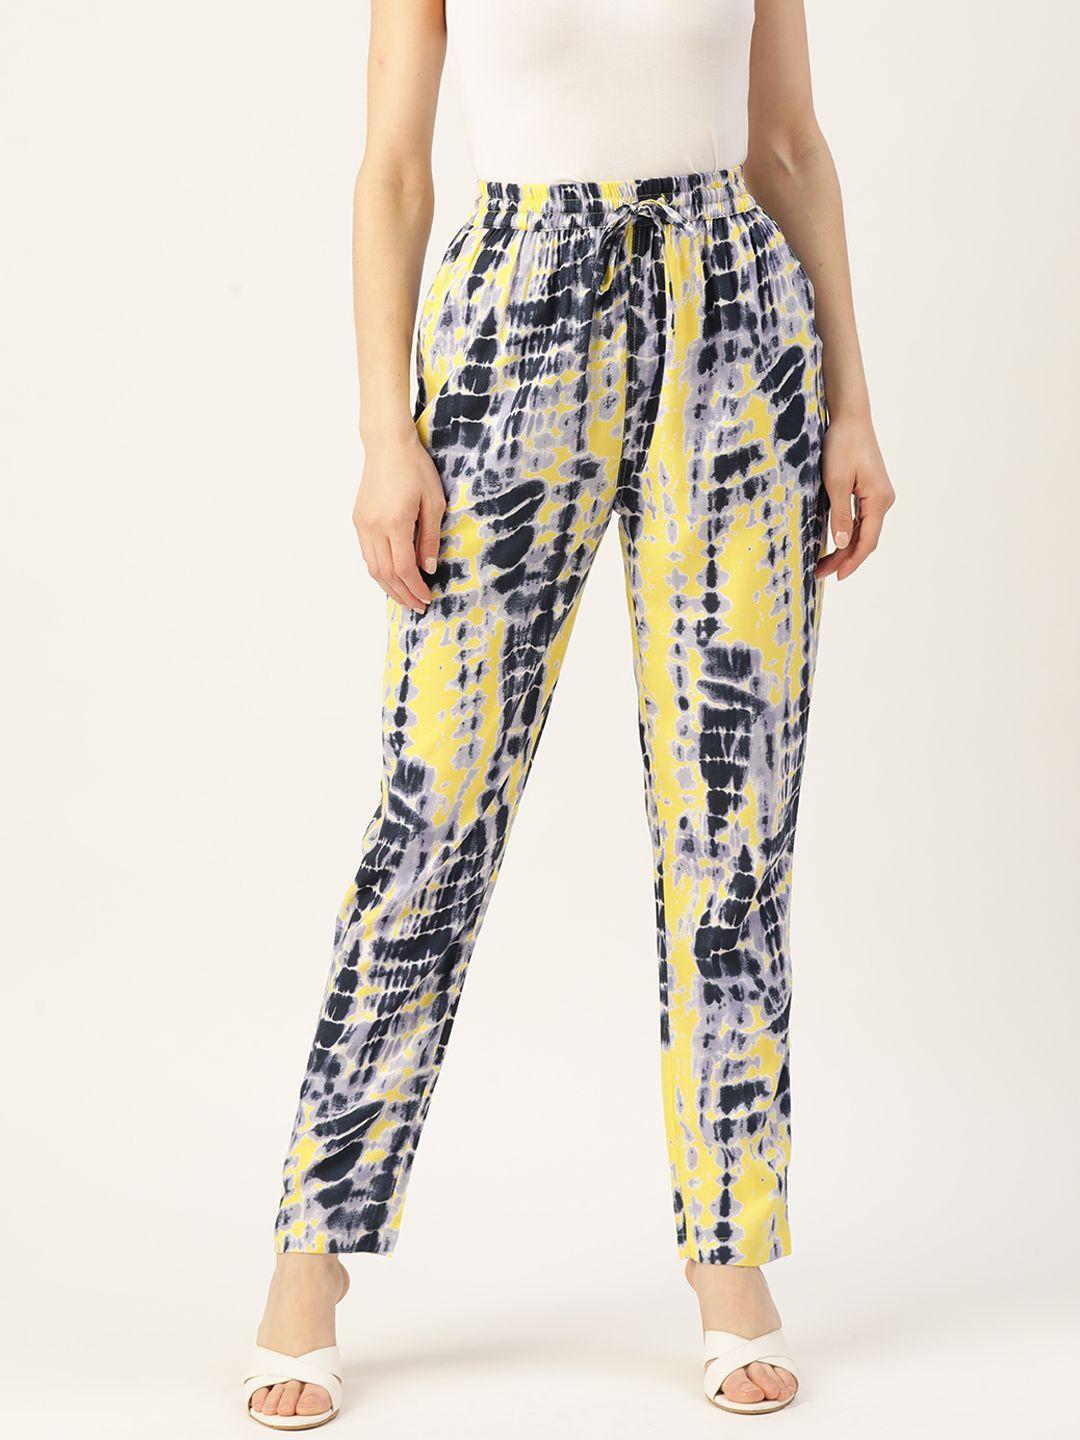 rue-collection-women-black-&-yellow-printed-high-rise-trousers